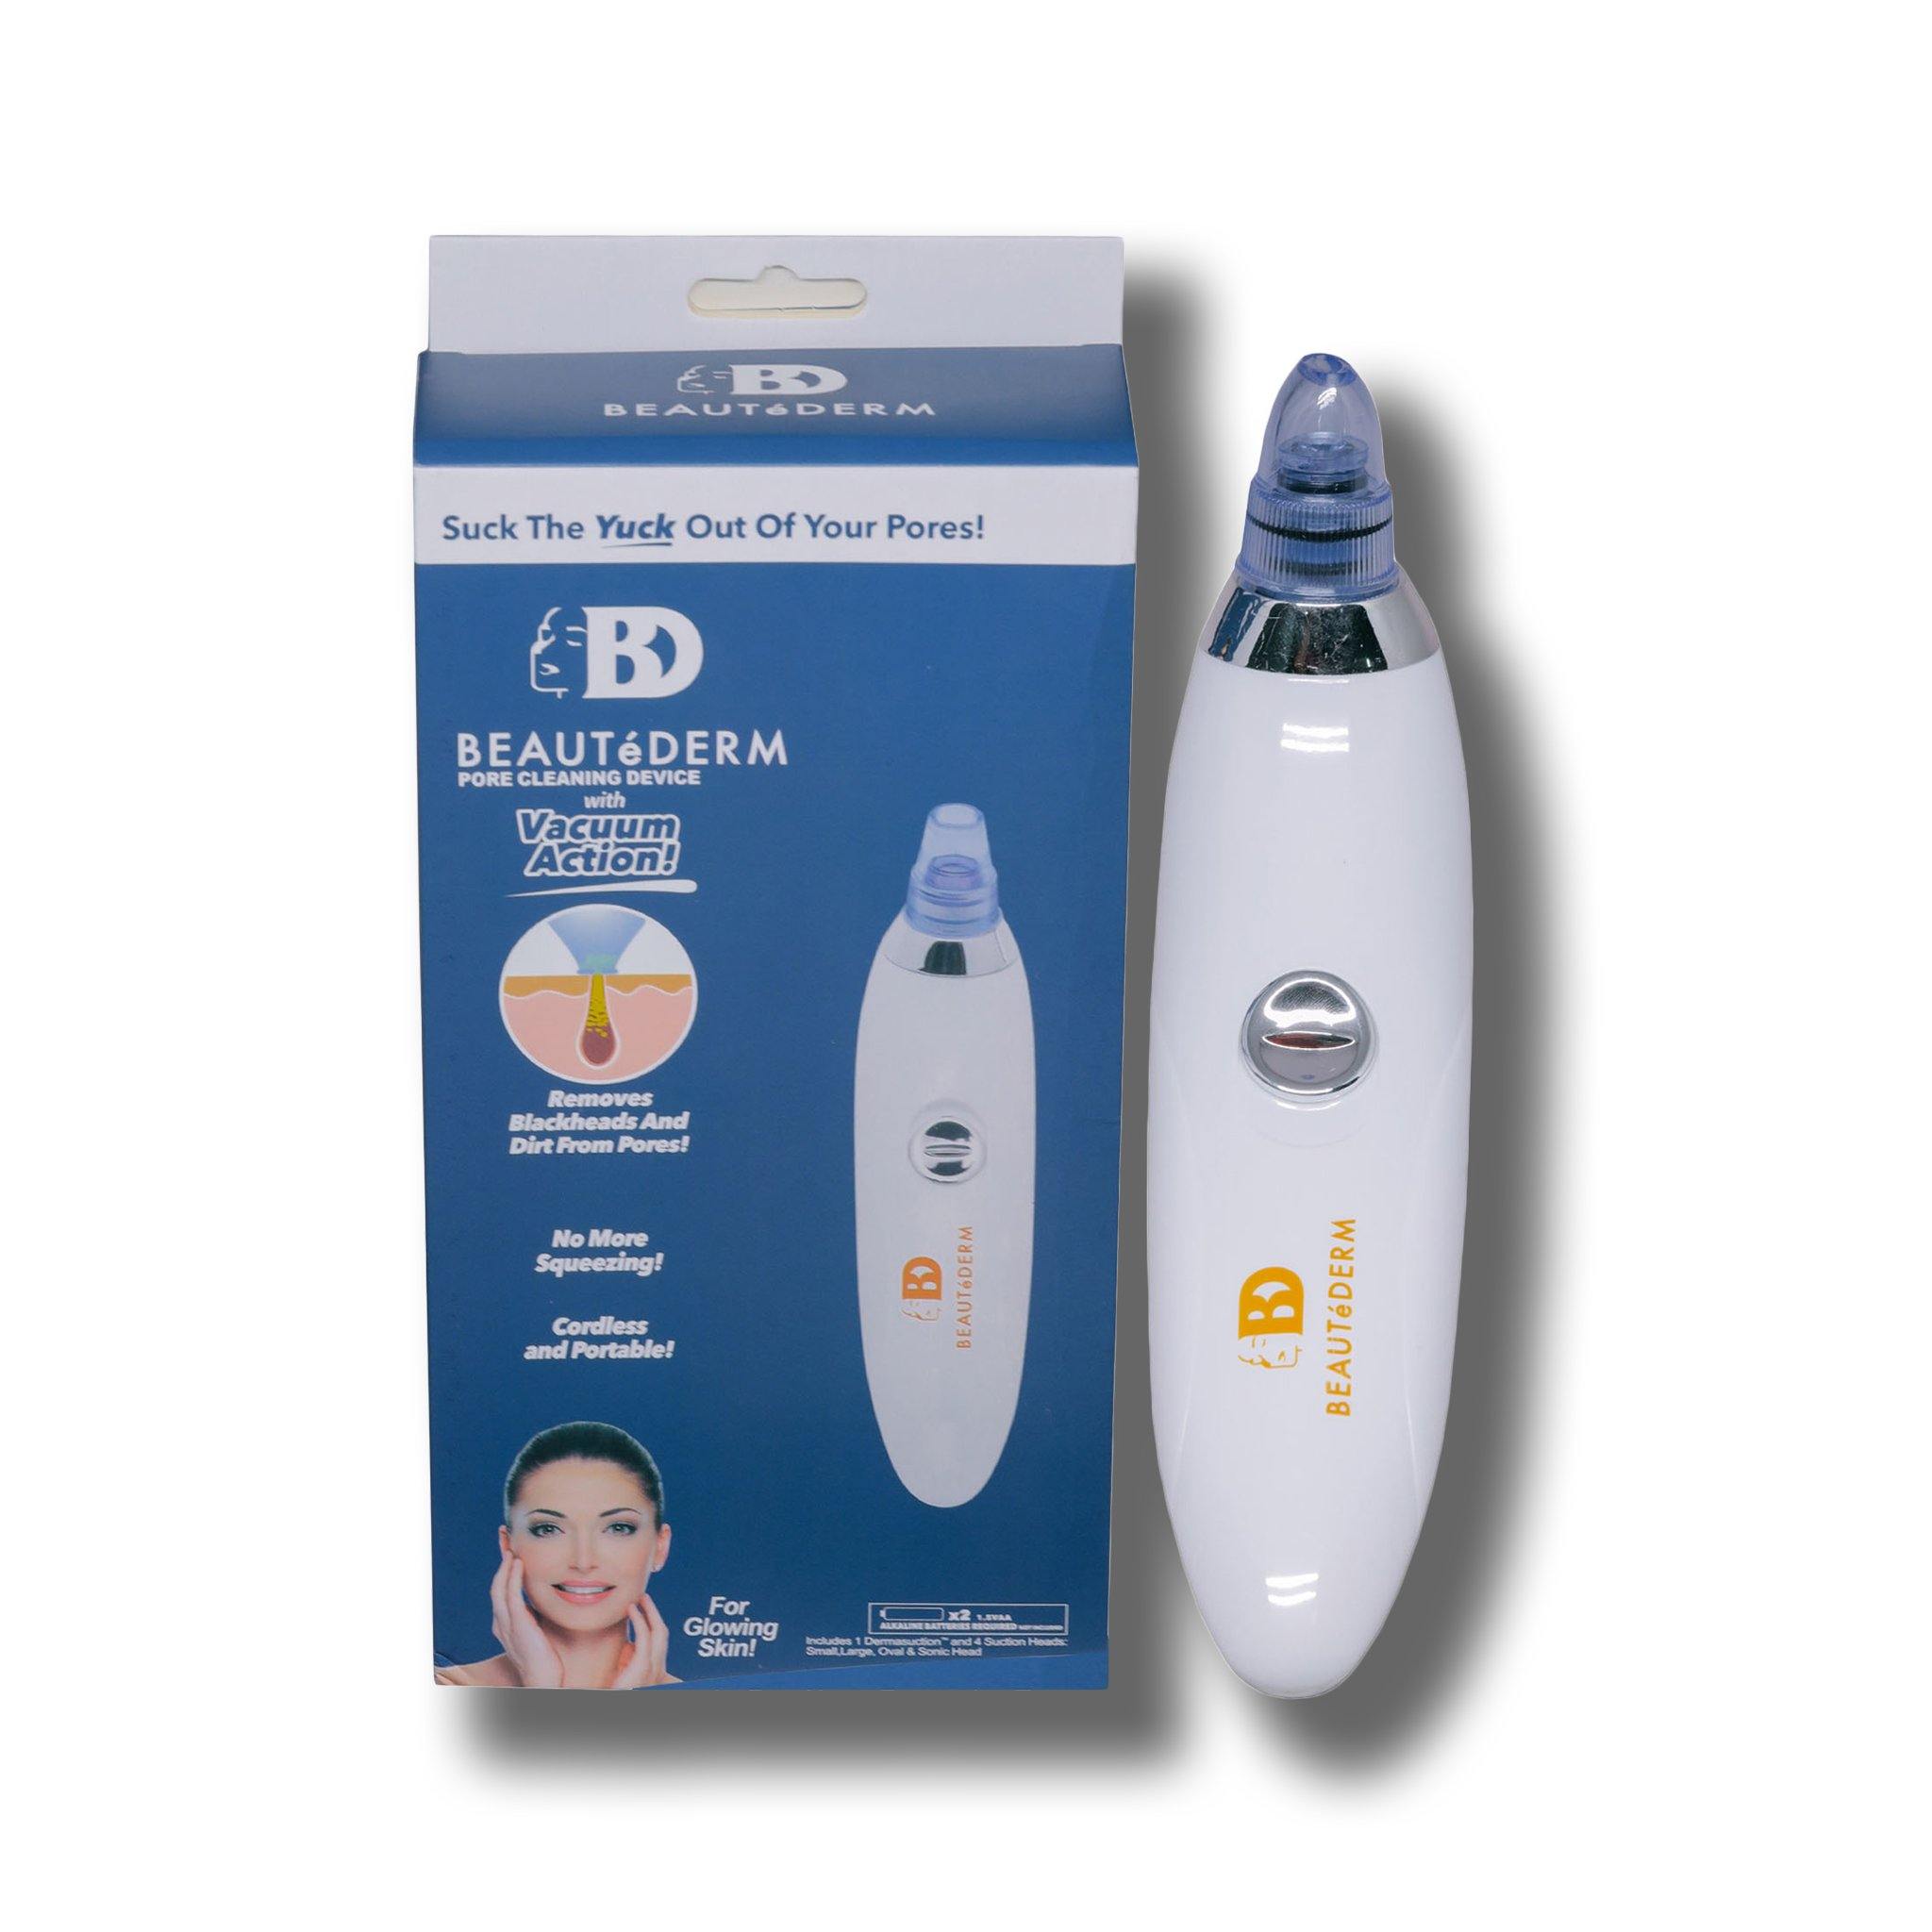 Pore Cleaning Device with Vacuum Action, by Beautederm